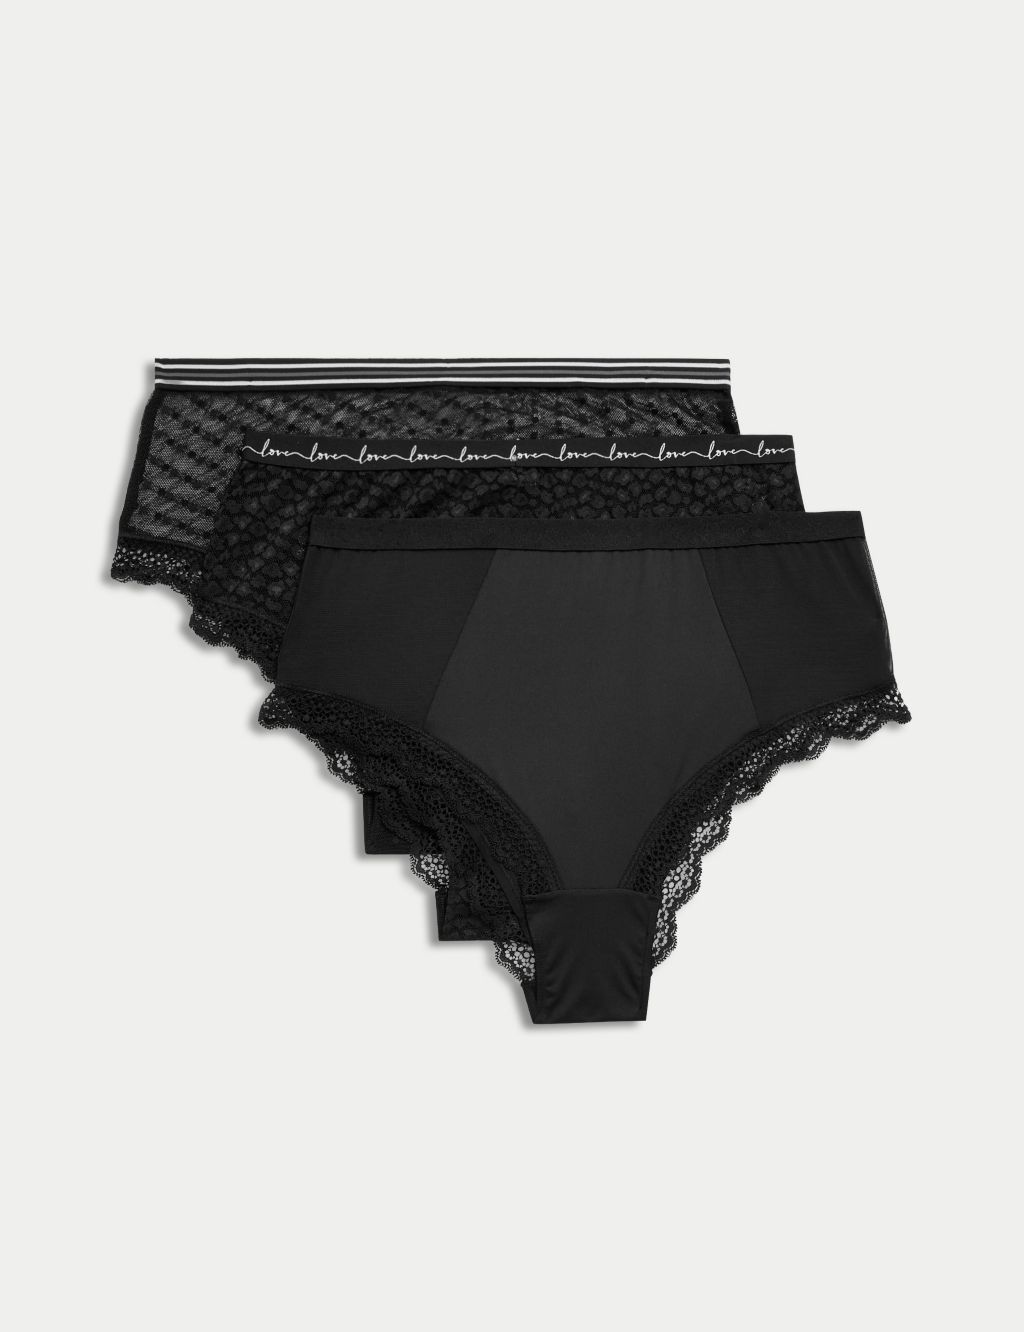 M&S high-waisted knickers that 'pull your tummy in' now only £10 in huge  shapeware sale - MyLondon